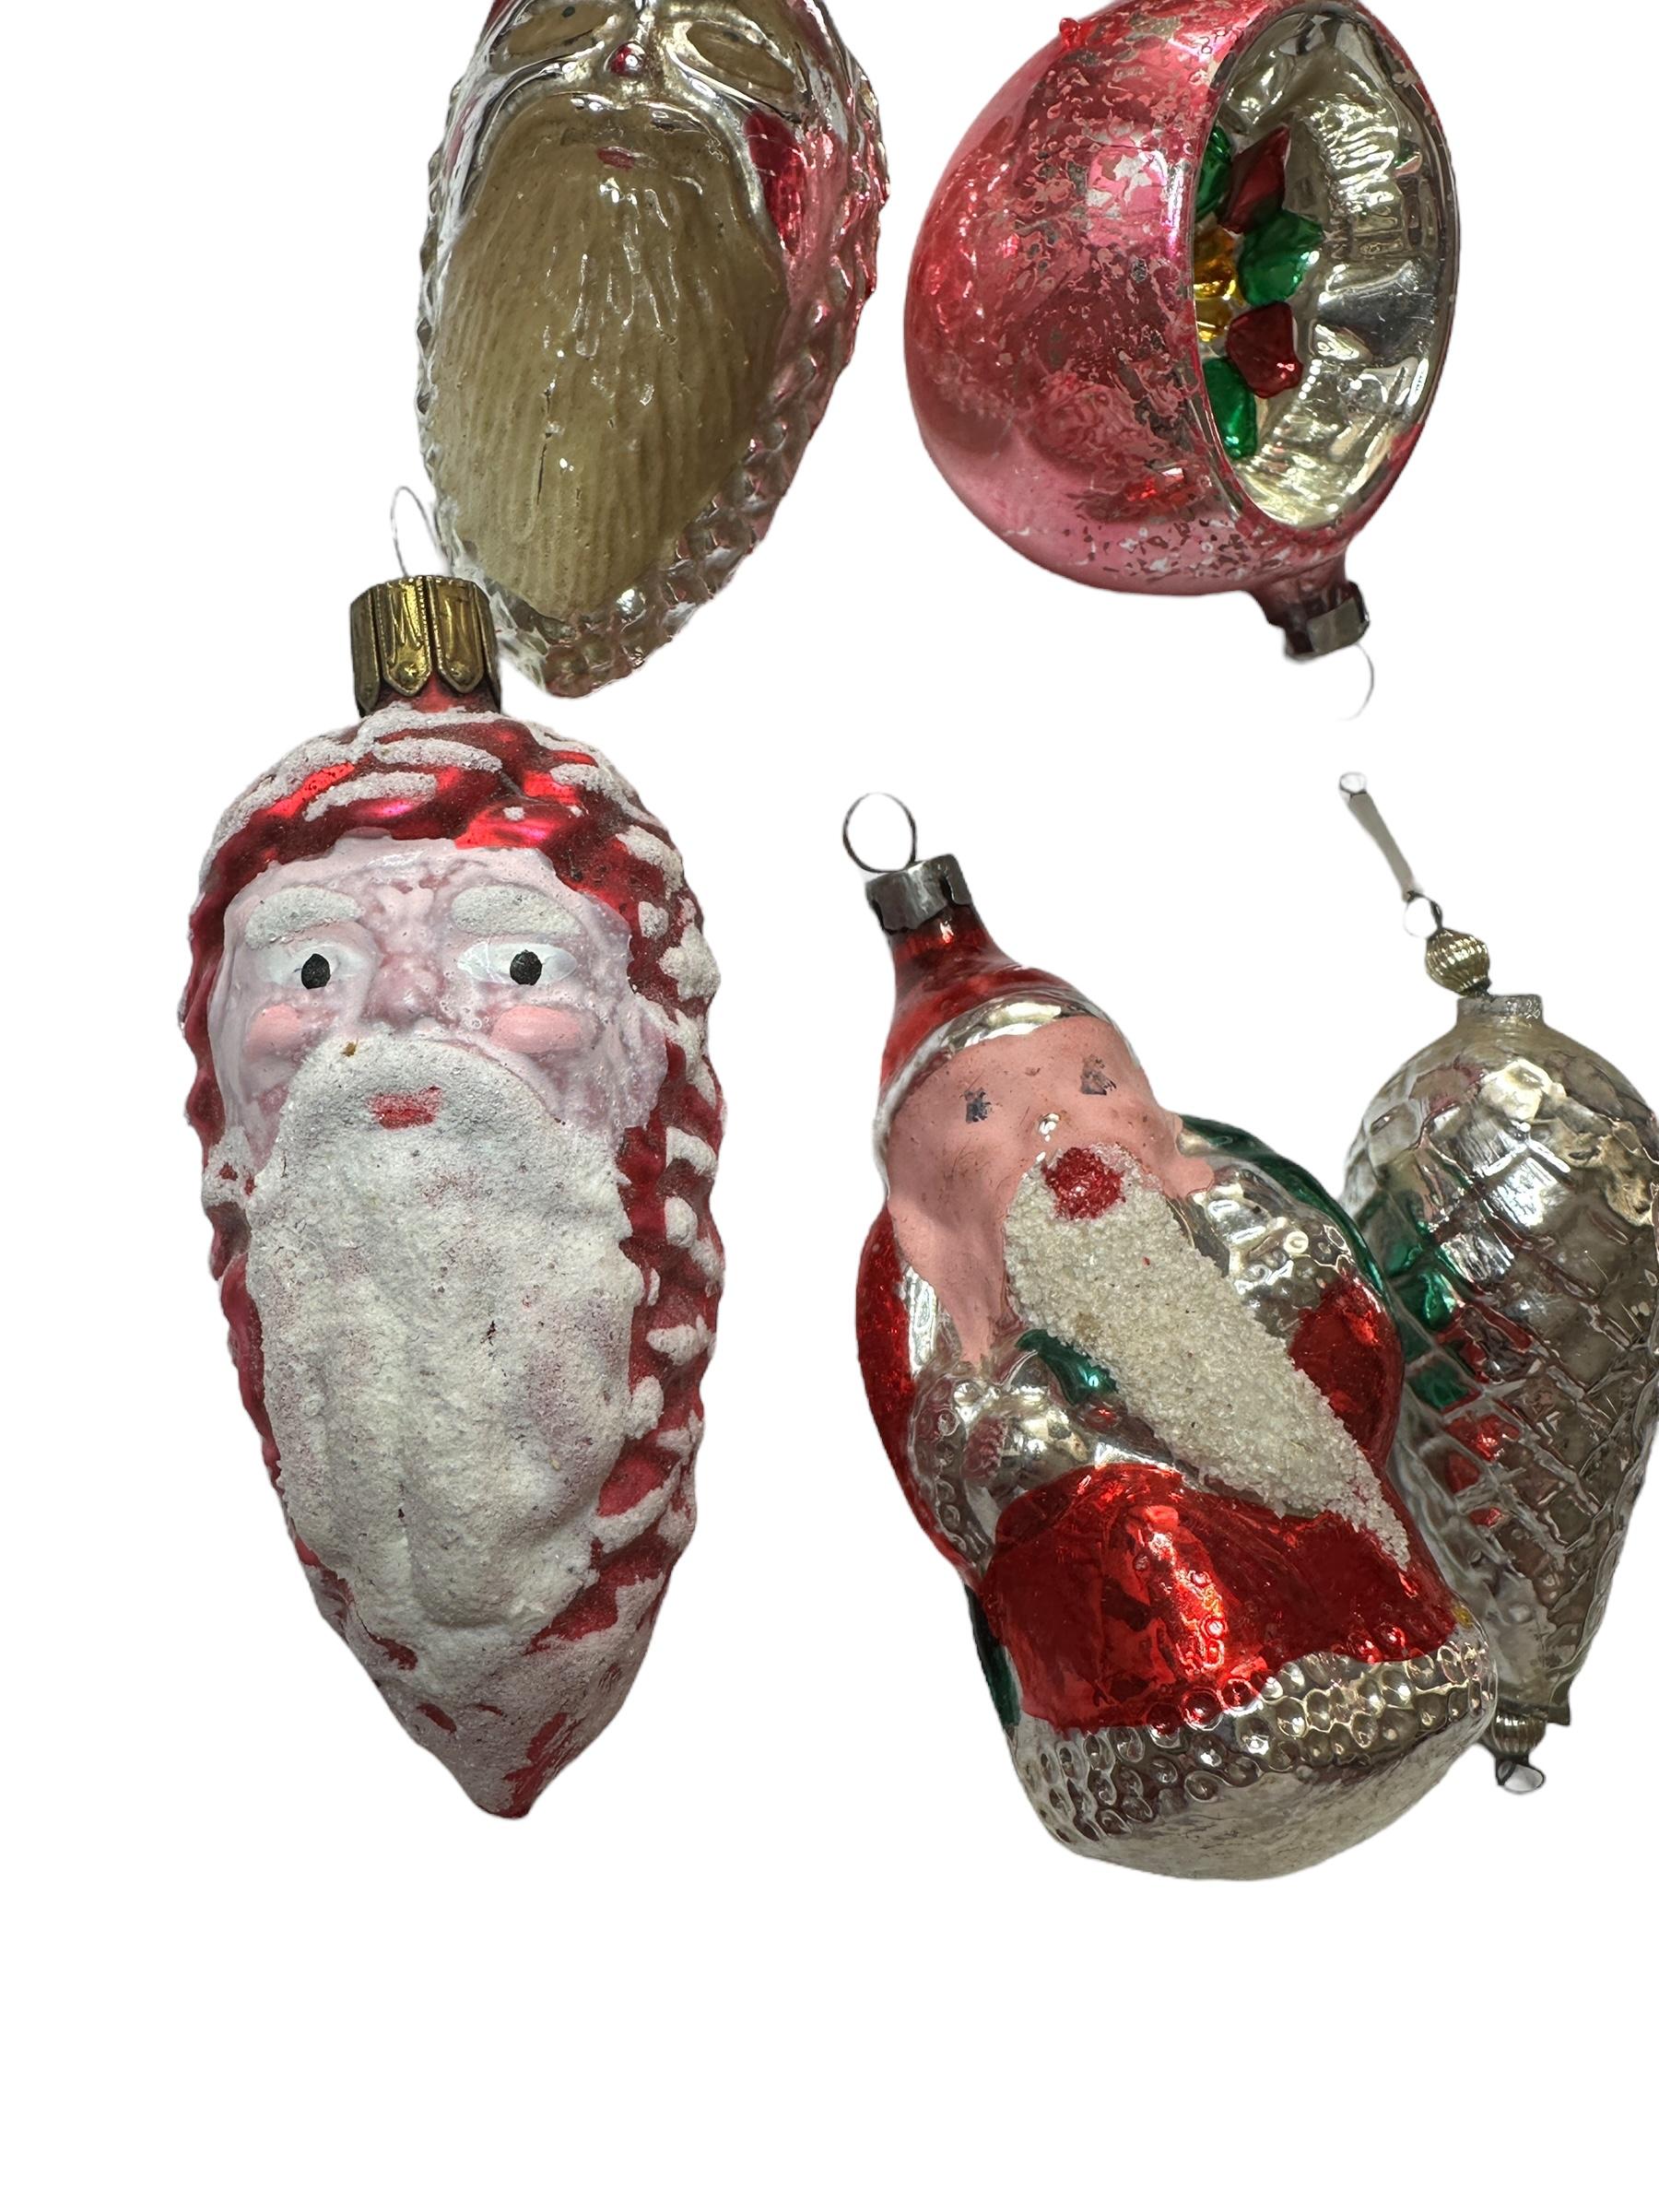 A rare Christmas ornament set from Germany or Austria. Each is made from mouth blown glass, these would be a great addition for your Christmas or feather tree. Size always given for the tallest item in the pictures. Age approx. 1930s to 1940s or